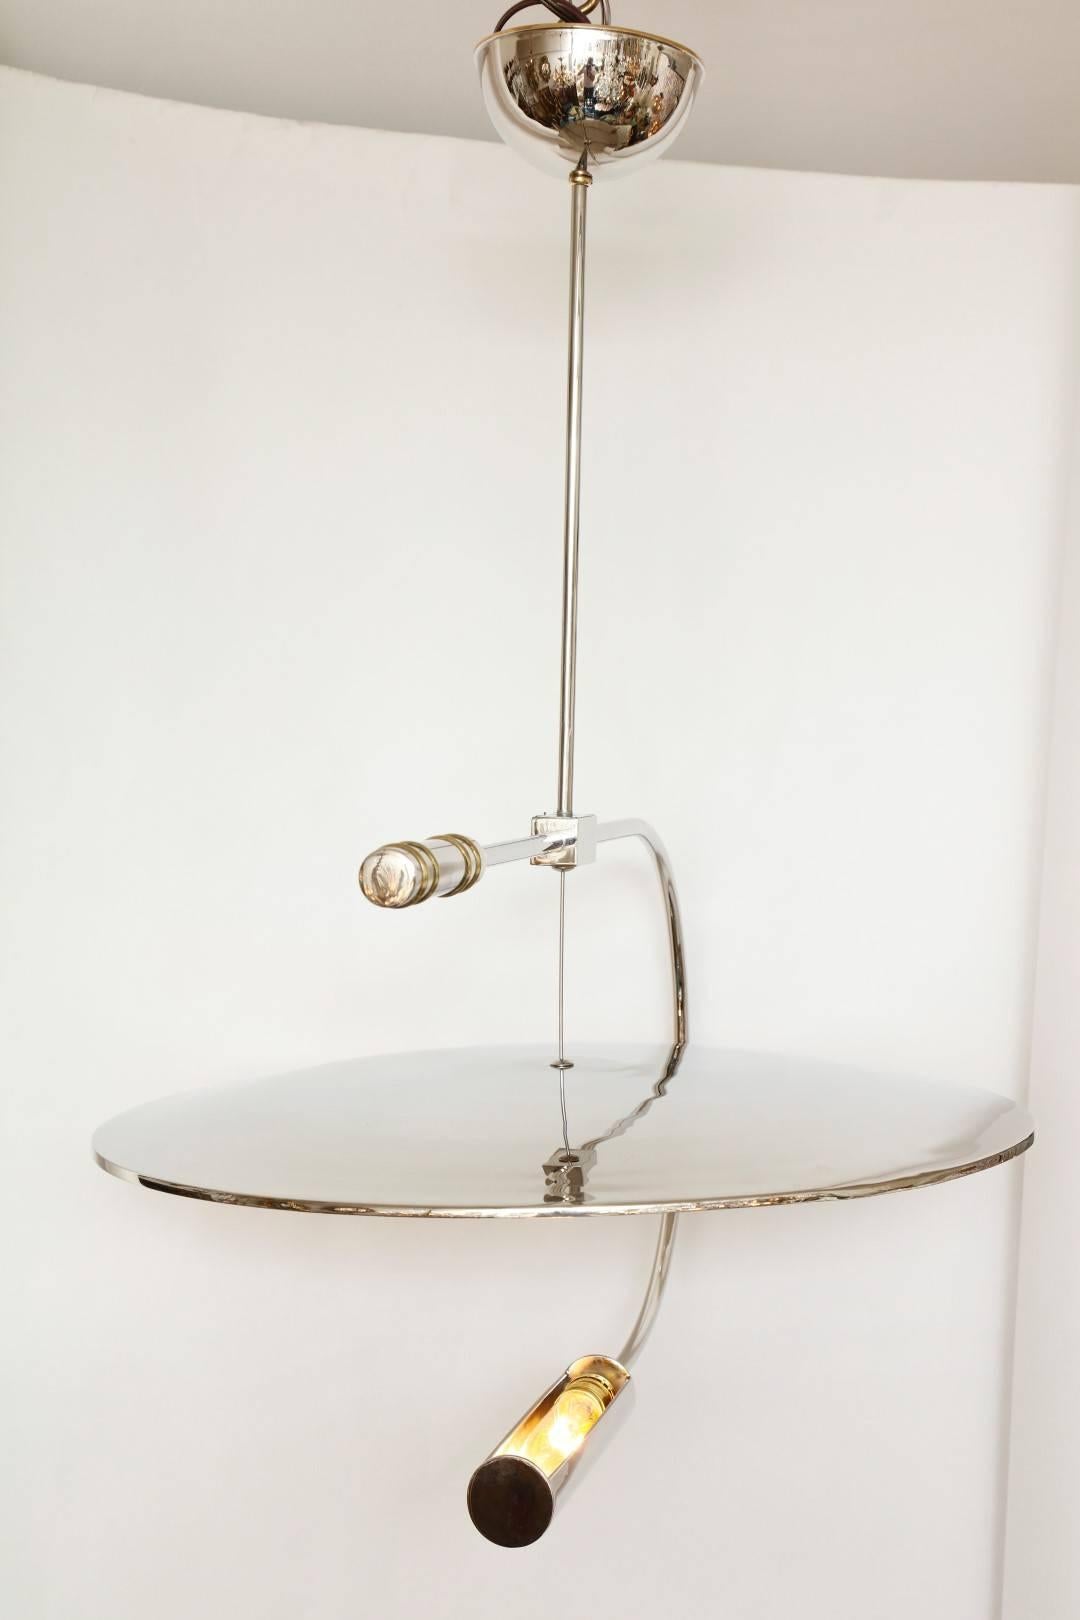 Phaeton Ceiling Light by David Duncan Studio In Excellent Condition For Sale In New York, NY